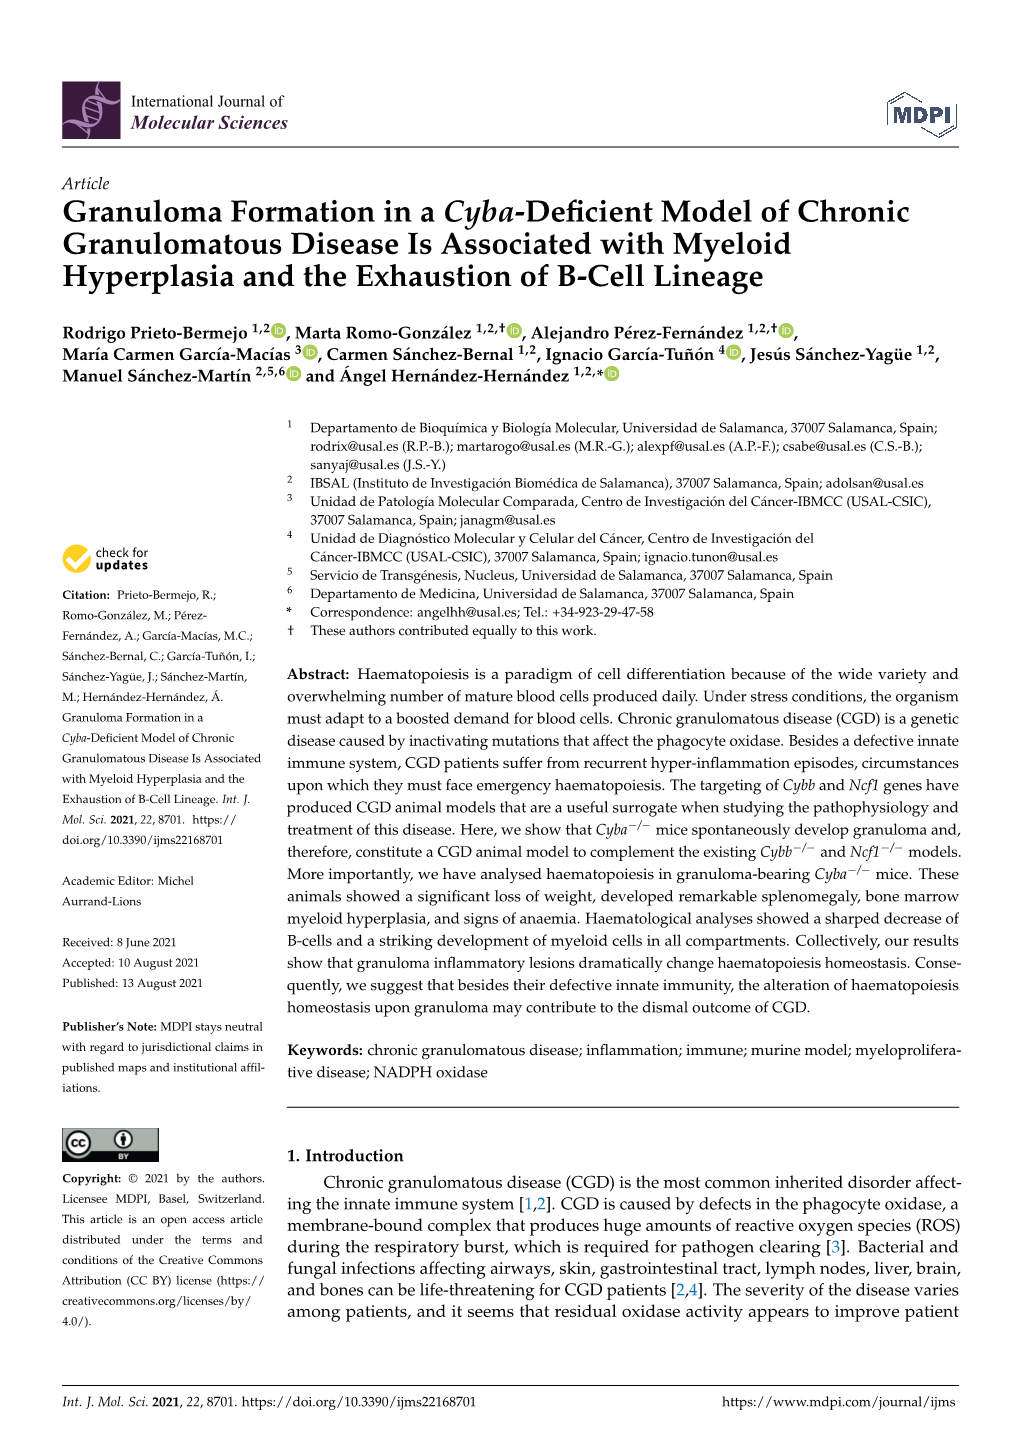 Granuloma Formation in a Cyba-Deficient Model of Chronic